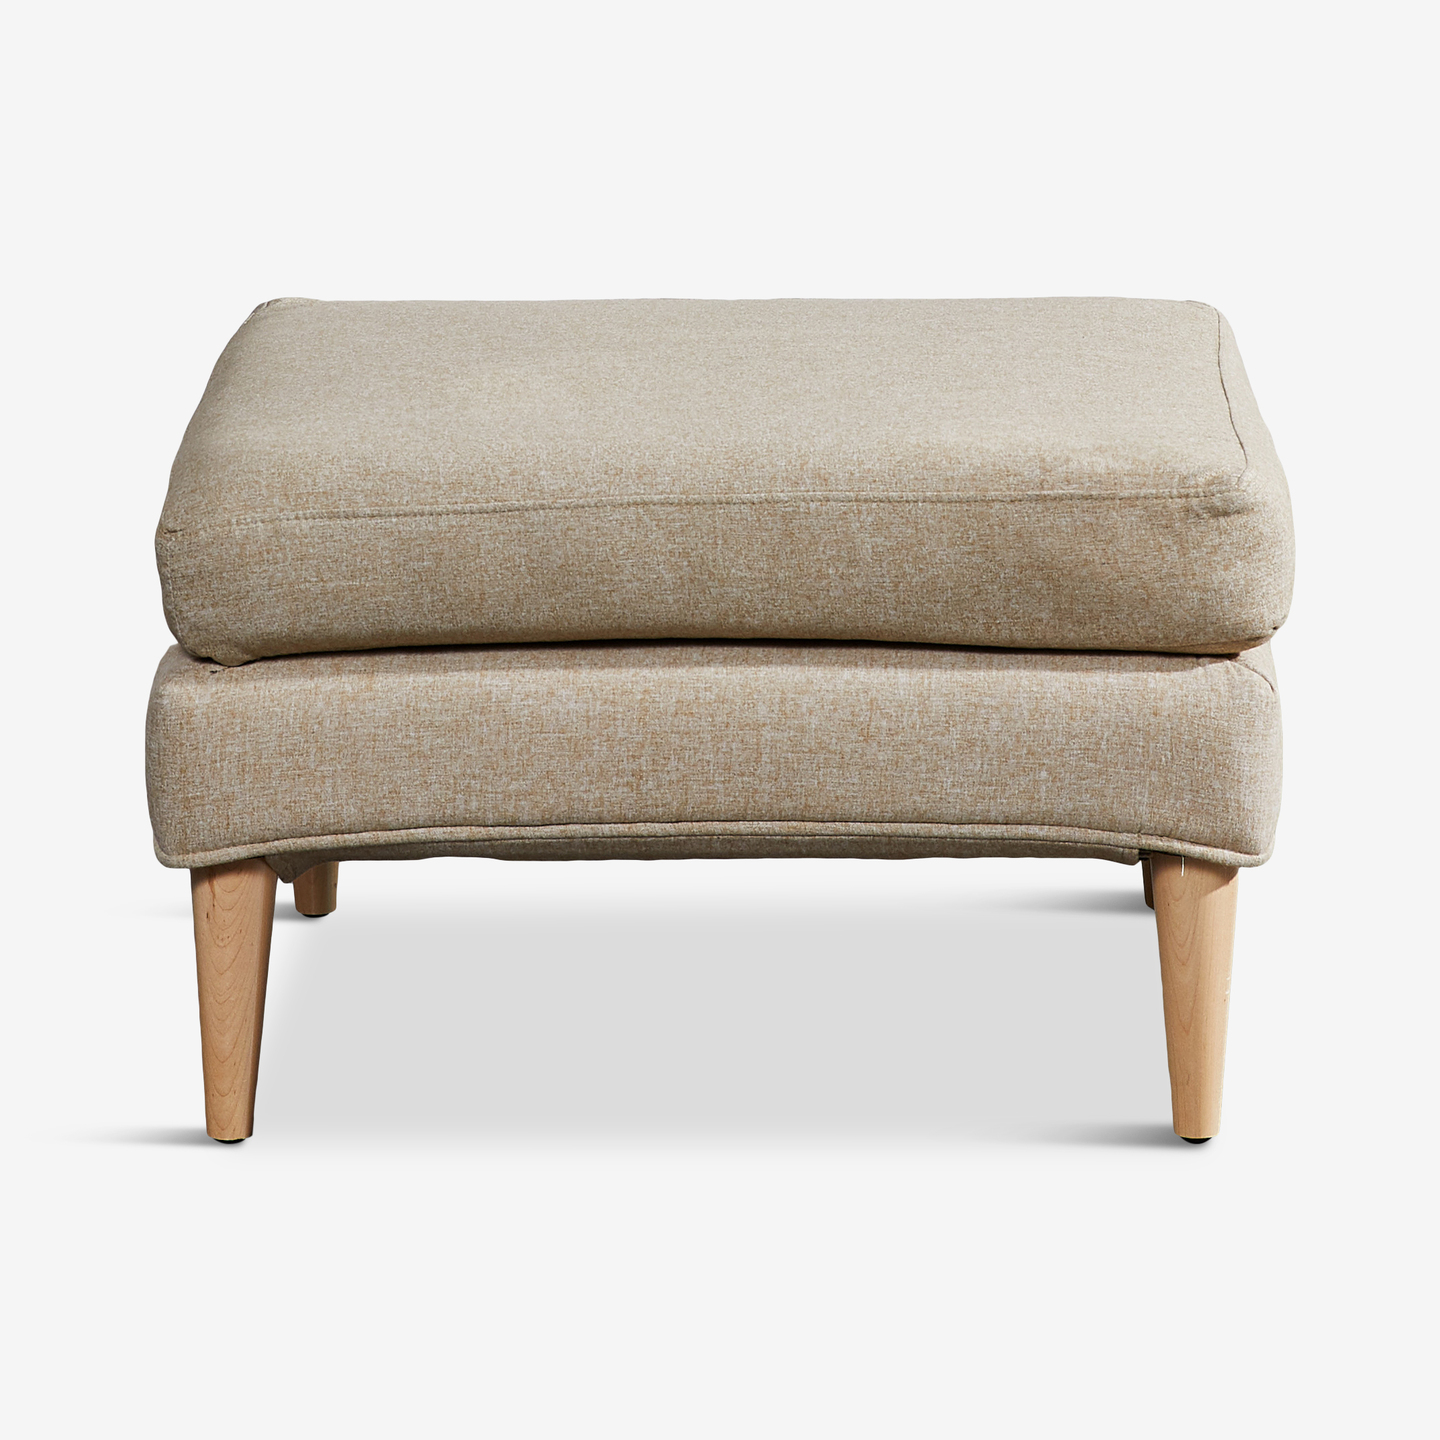 429_Campaign-Ottoman-Textured-Oat_Flat-Front 2020